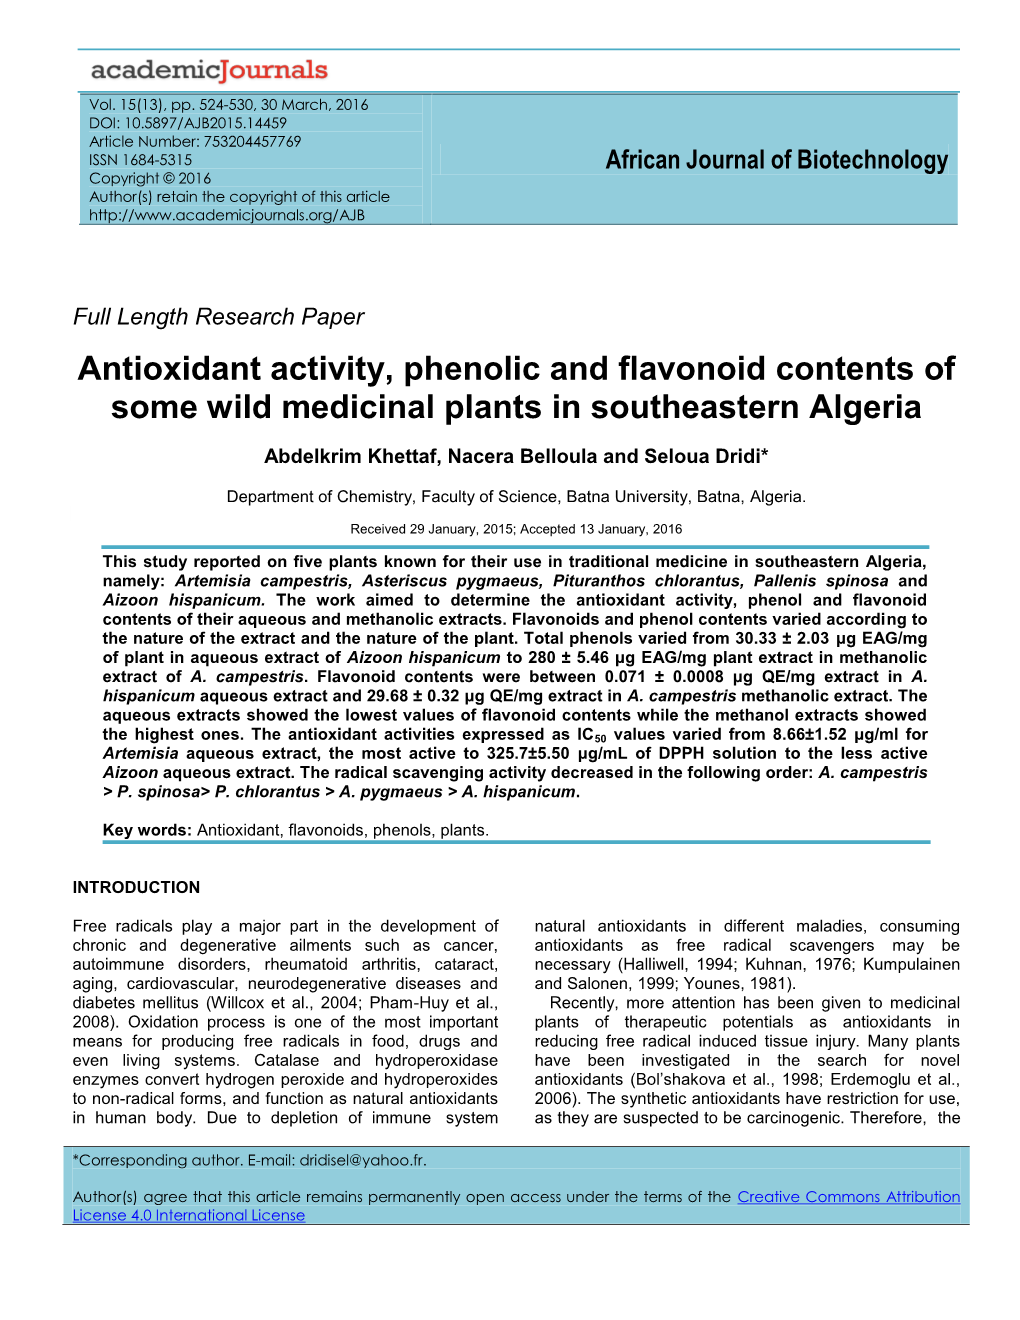 Antioxidant Activity, Phenolic and Flavonoid Contents of Some Wild Medicinal Plants in Southeastern Algeria